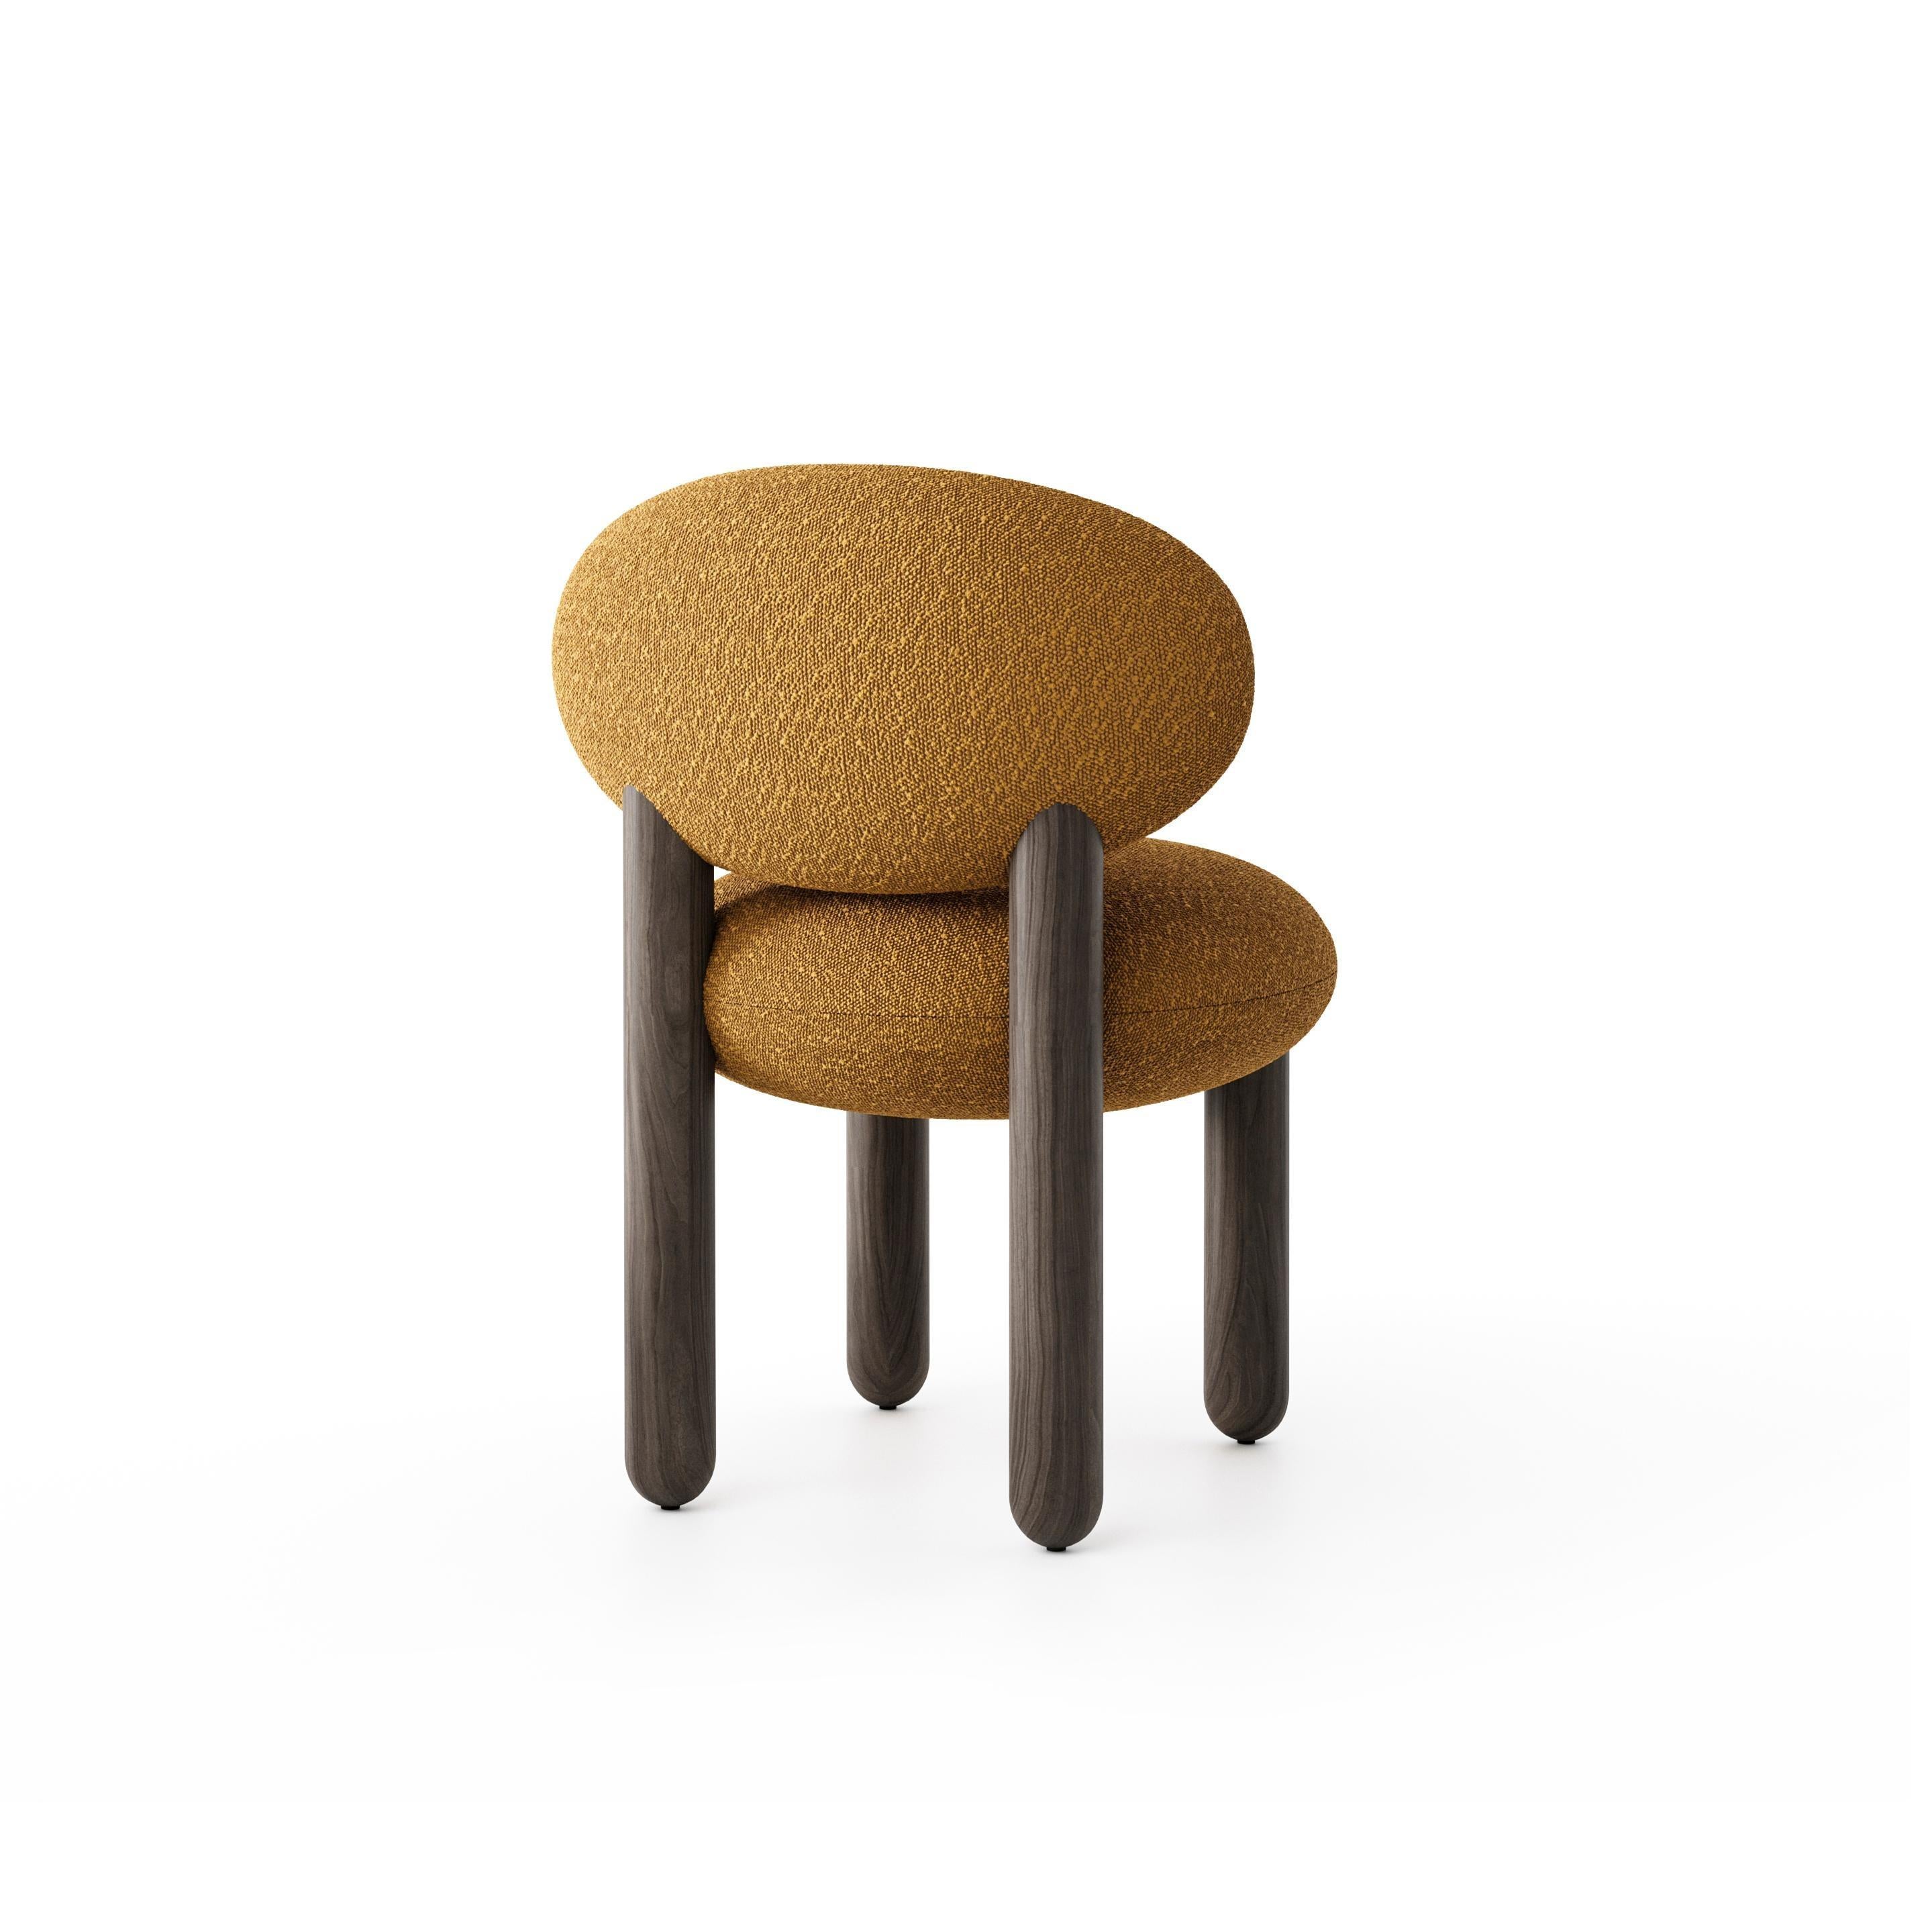 Dining Chair 'Flock CS2' 
Designer: Kateryna Sokolova
Materials: wood, plywood, metal, molded foam, textile
Available in a wide range of colors and other finishes and fabrics on request.
Dimensions: H 78 cm, W 55 cm, D 61 cm  seat H 47 cm

Color in